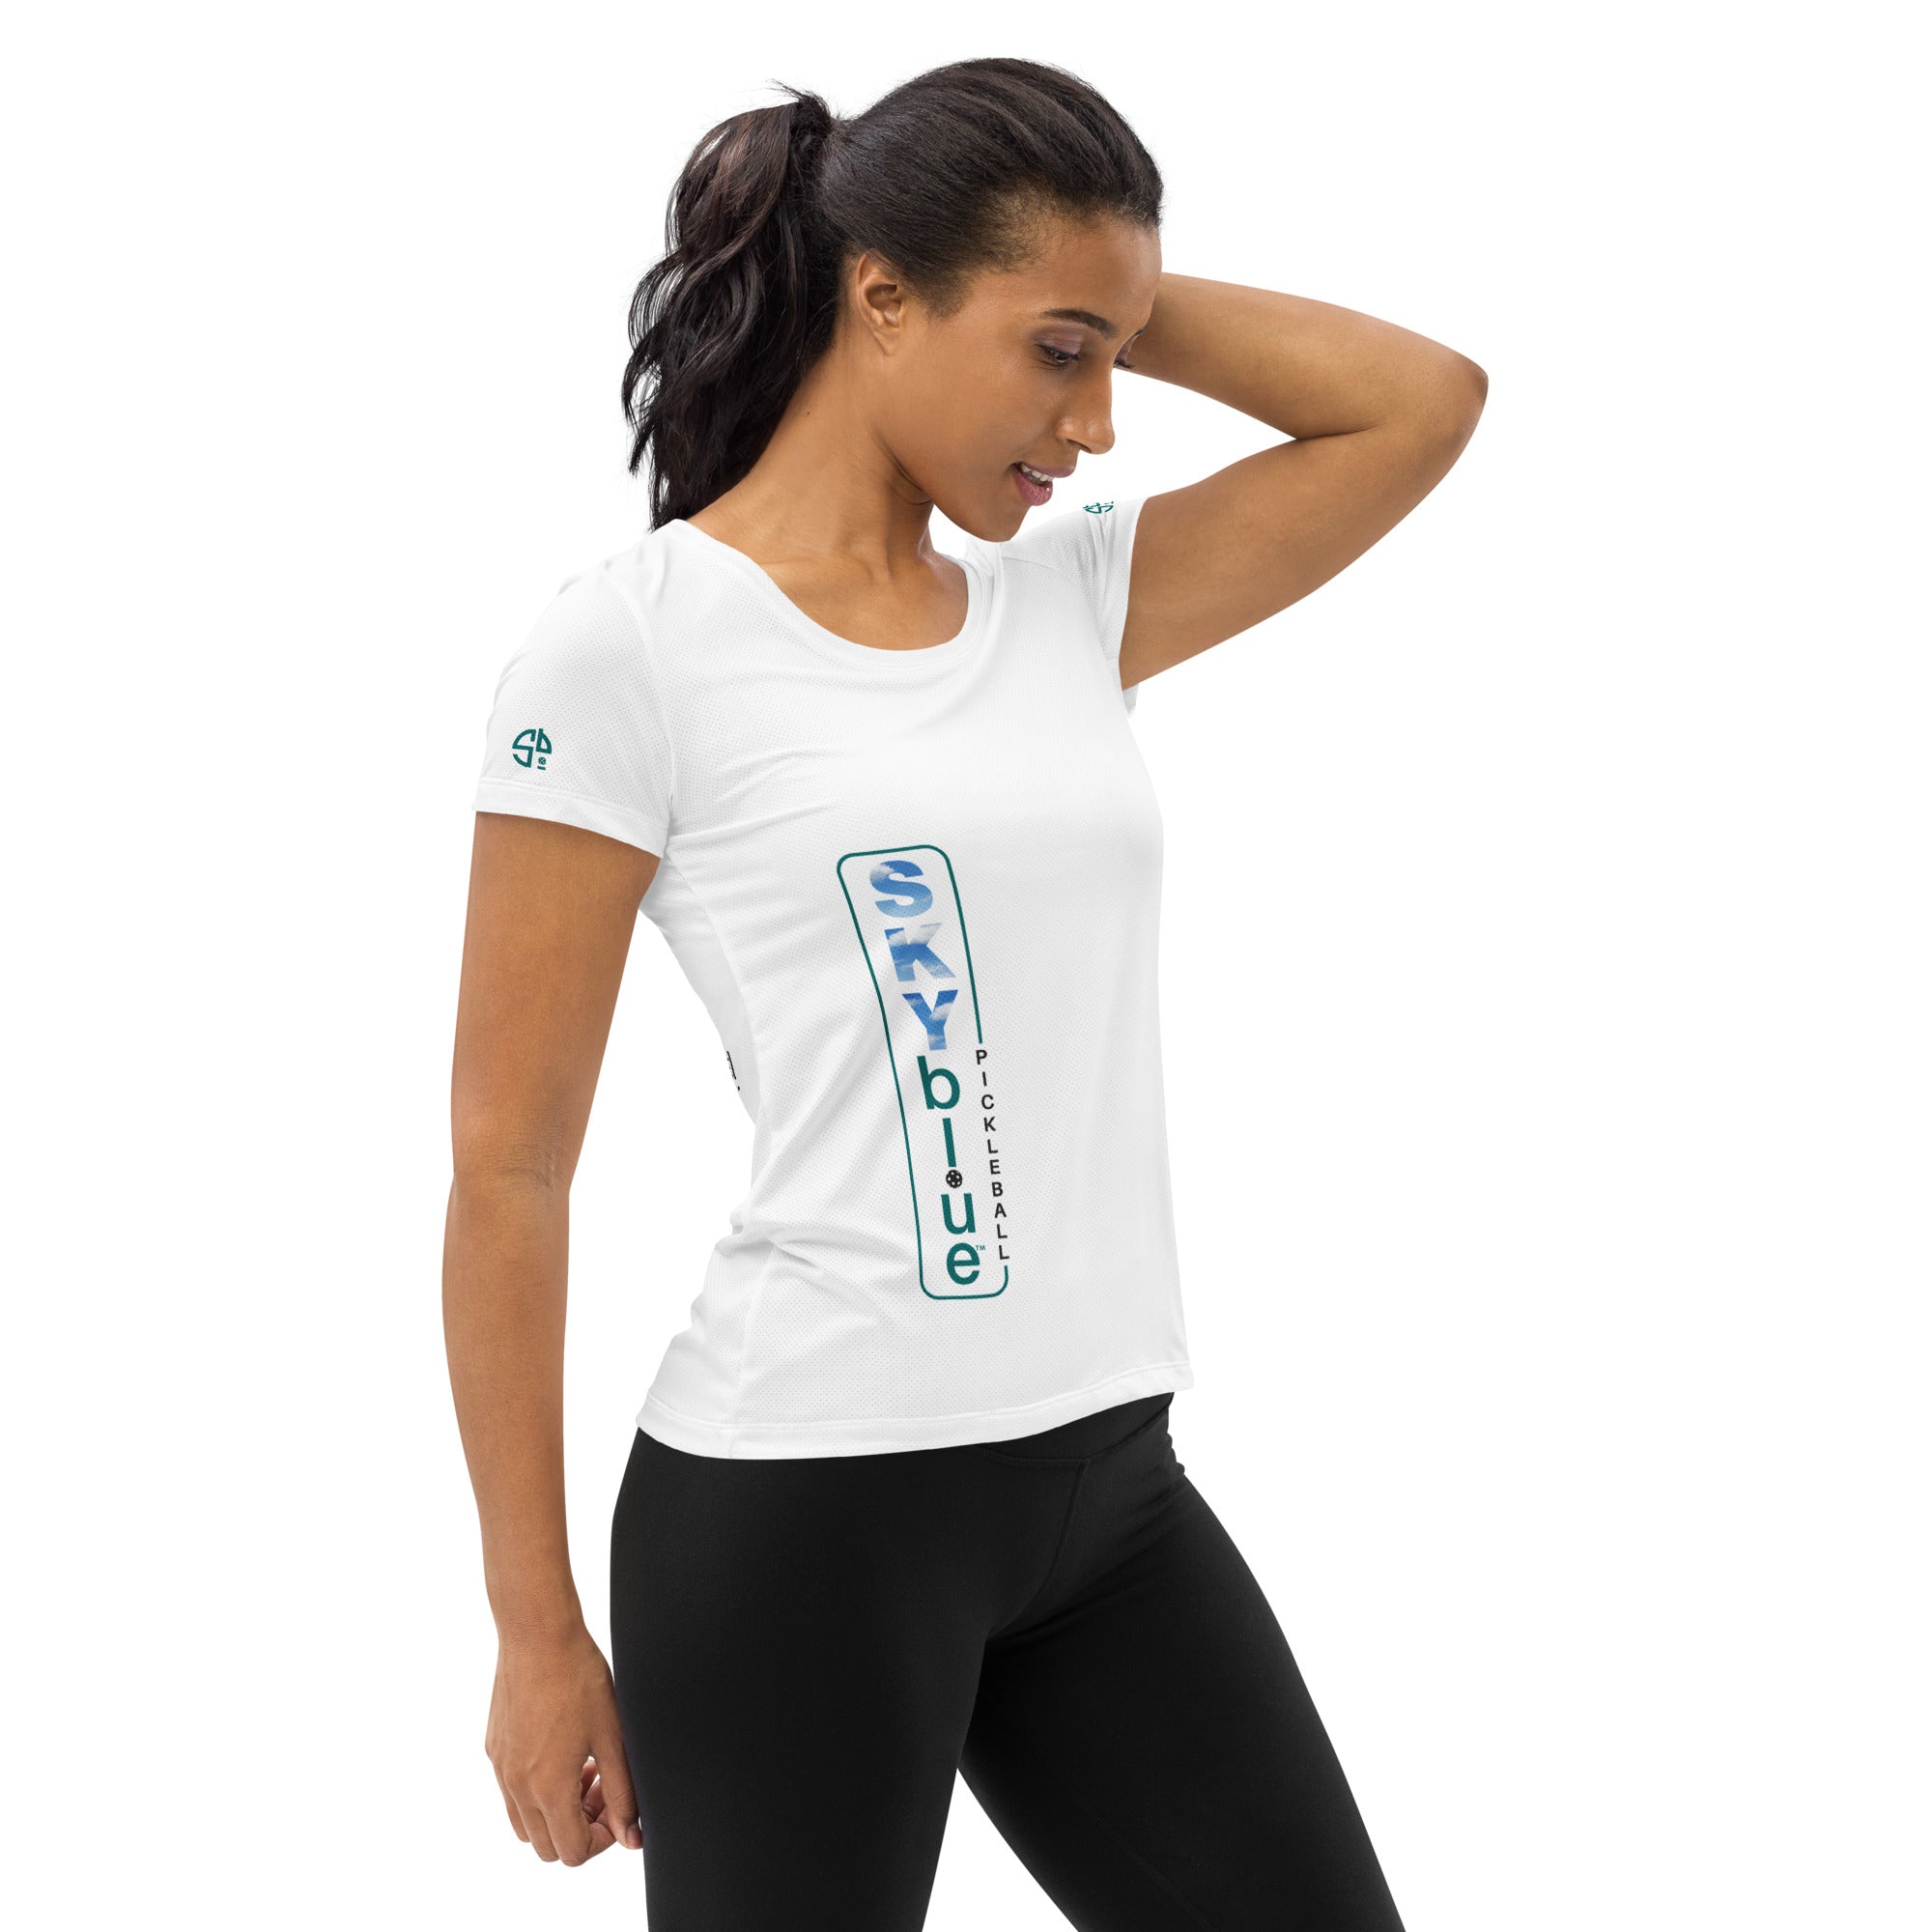 SKYblue™ Black Women's Performance Athletic T-Shirt for Pickleball Enthusiasts - Play Pickleball in Style! for Happy Hour Pattern